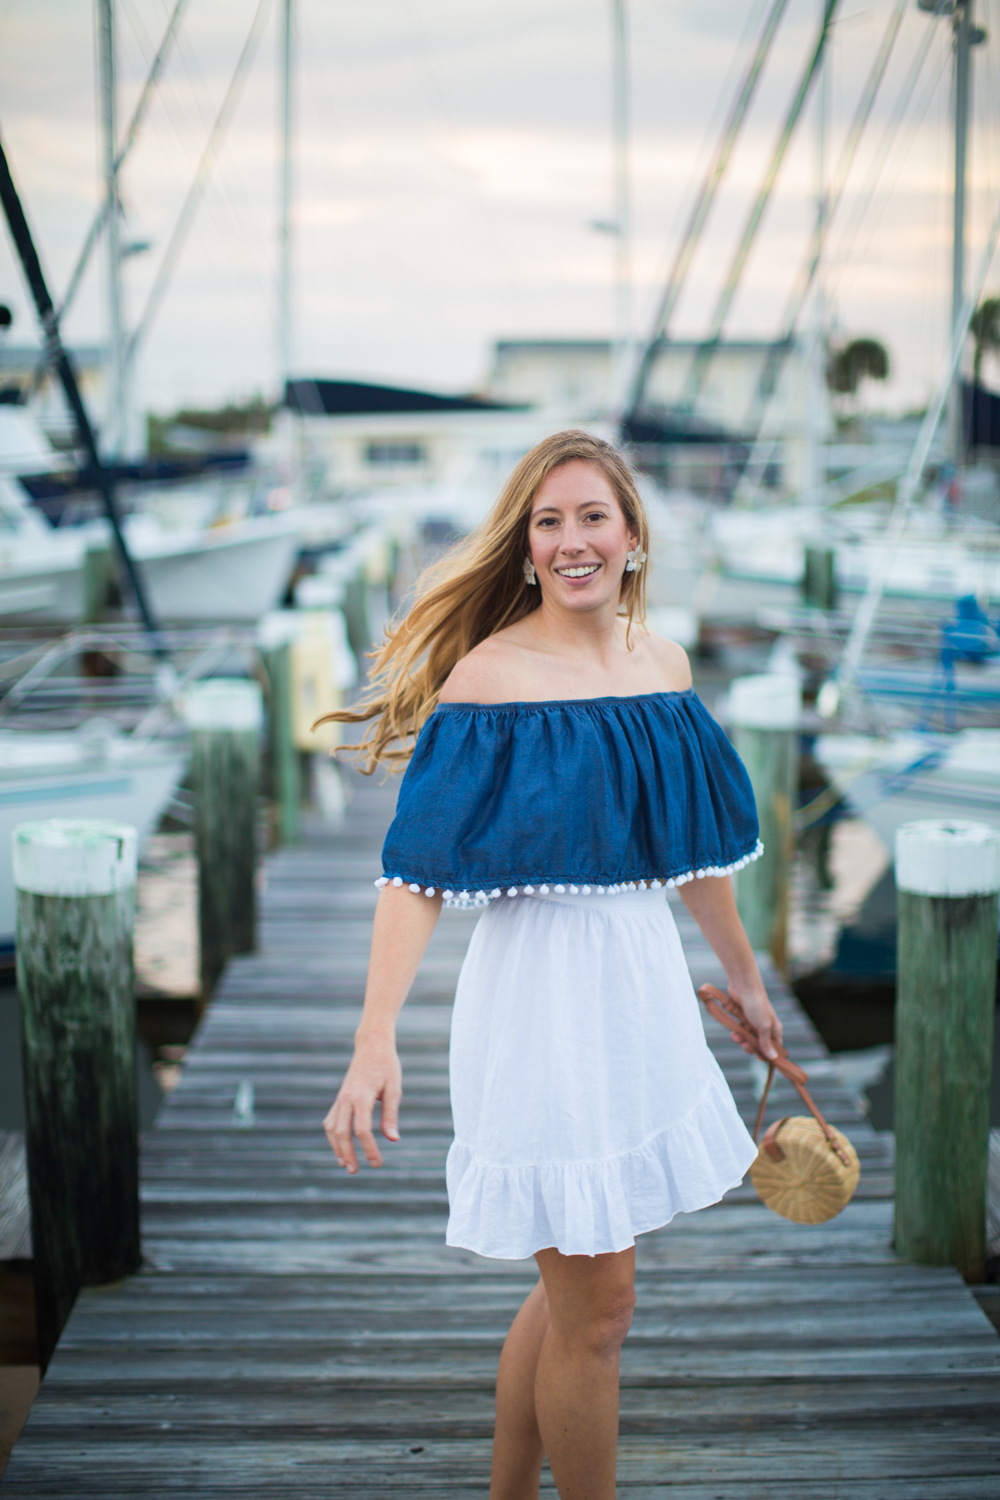 What to Wear on a Beach Vacation | Summer Beach Outfit Idea | Beach Vacation Outfit | Cruisewear | What to Pack for your Summer Beach Vacation | Beachwear for Women - A Nautical Inspired Summer Beach Outfit by Katie McCarty of Sunshine Style